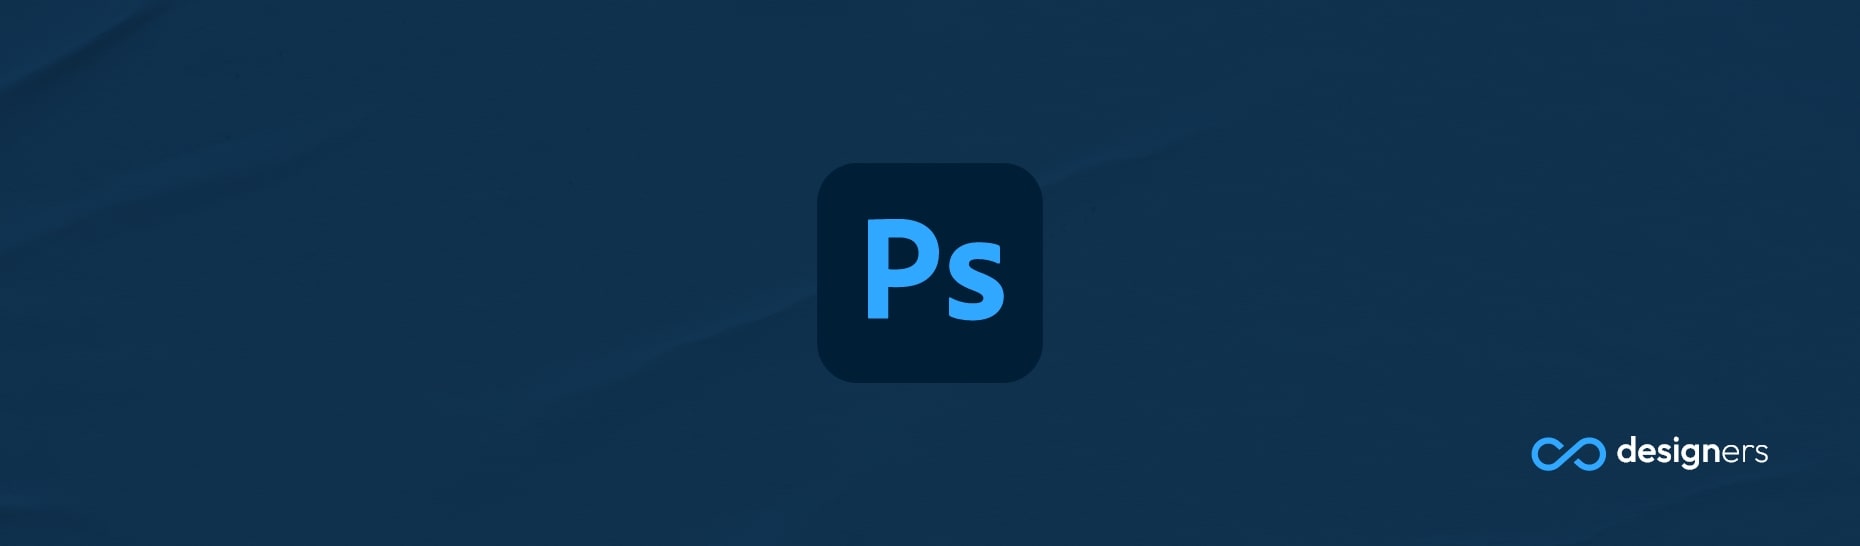 What Is the Size of A4 Paper in Photoshop?